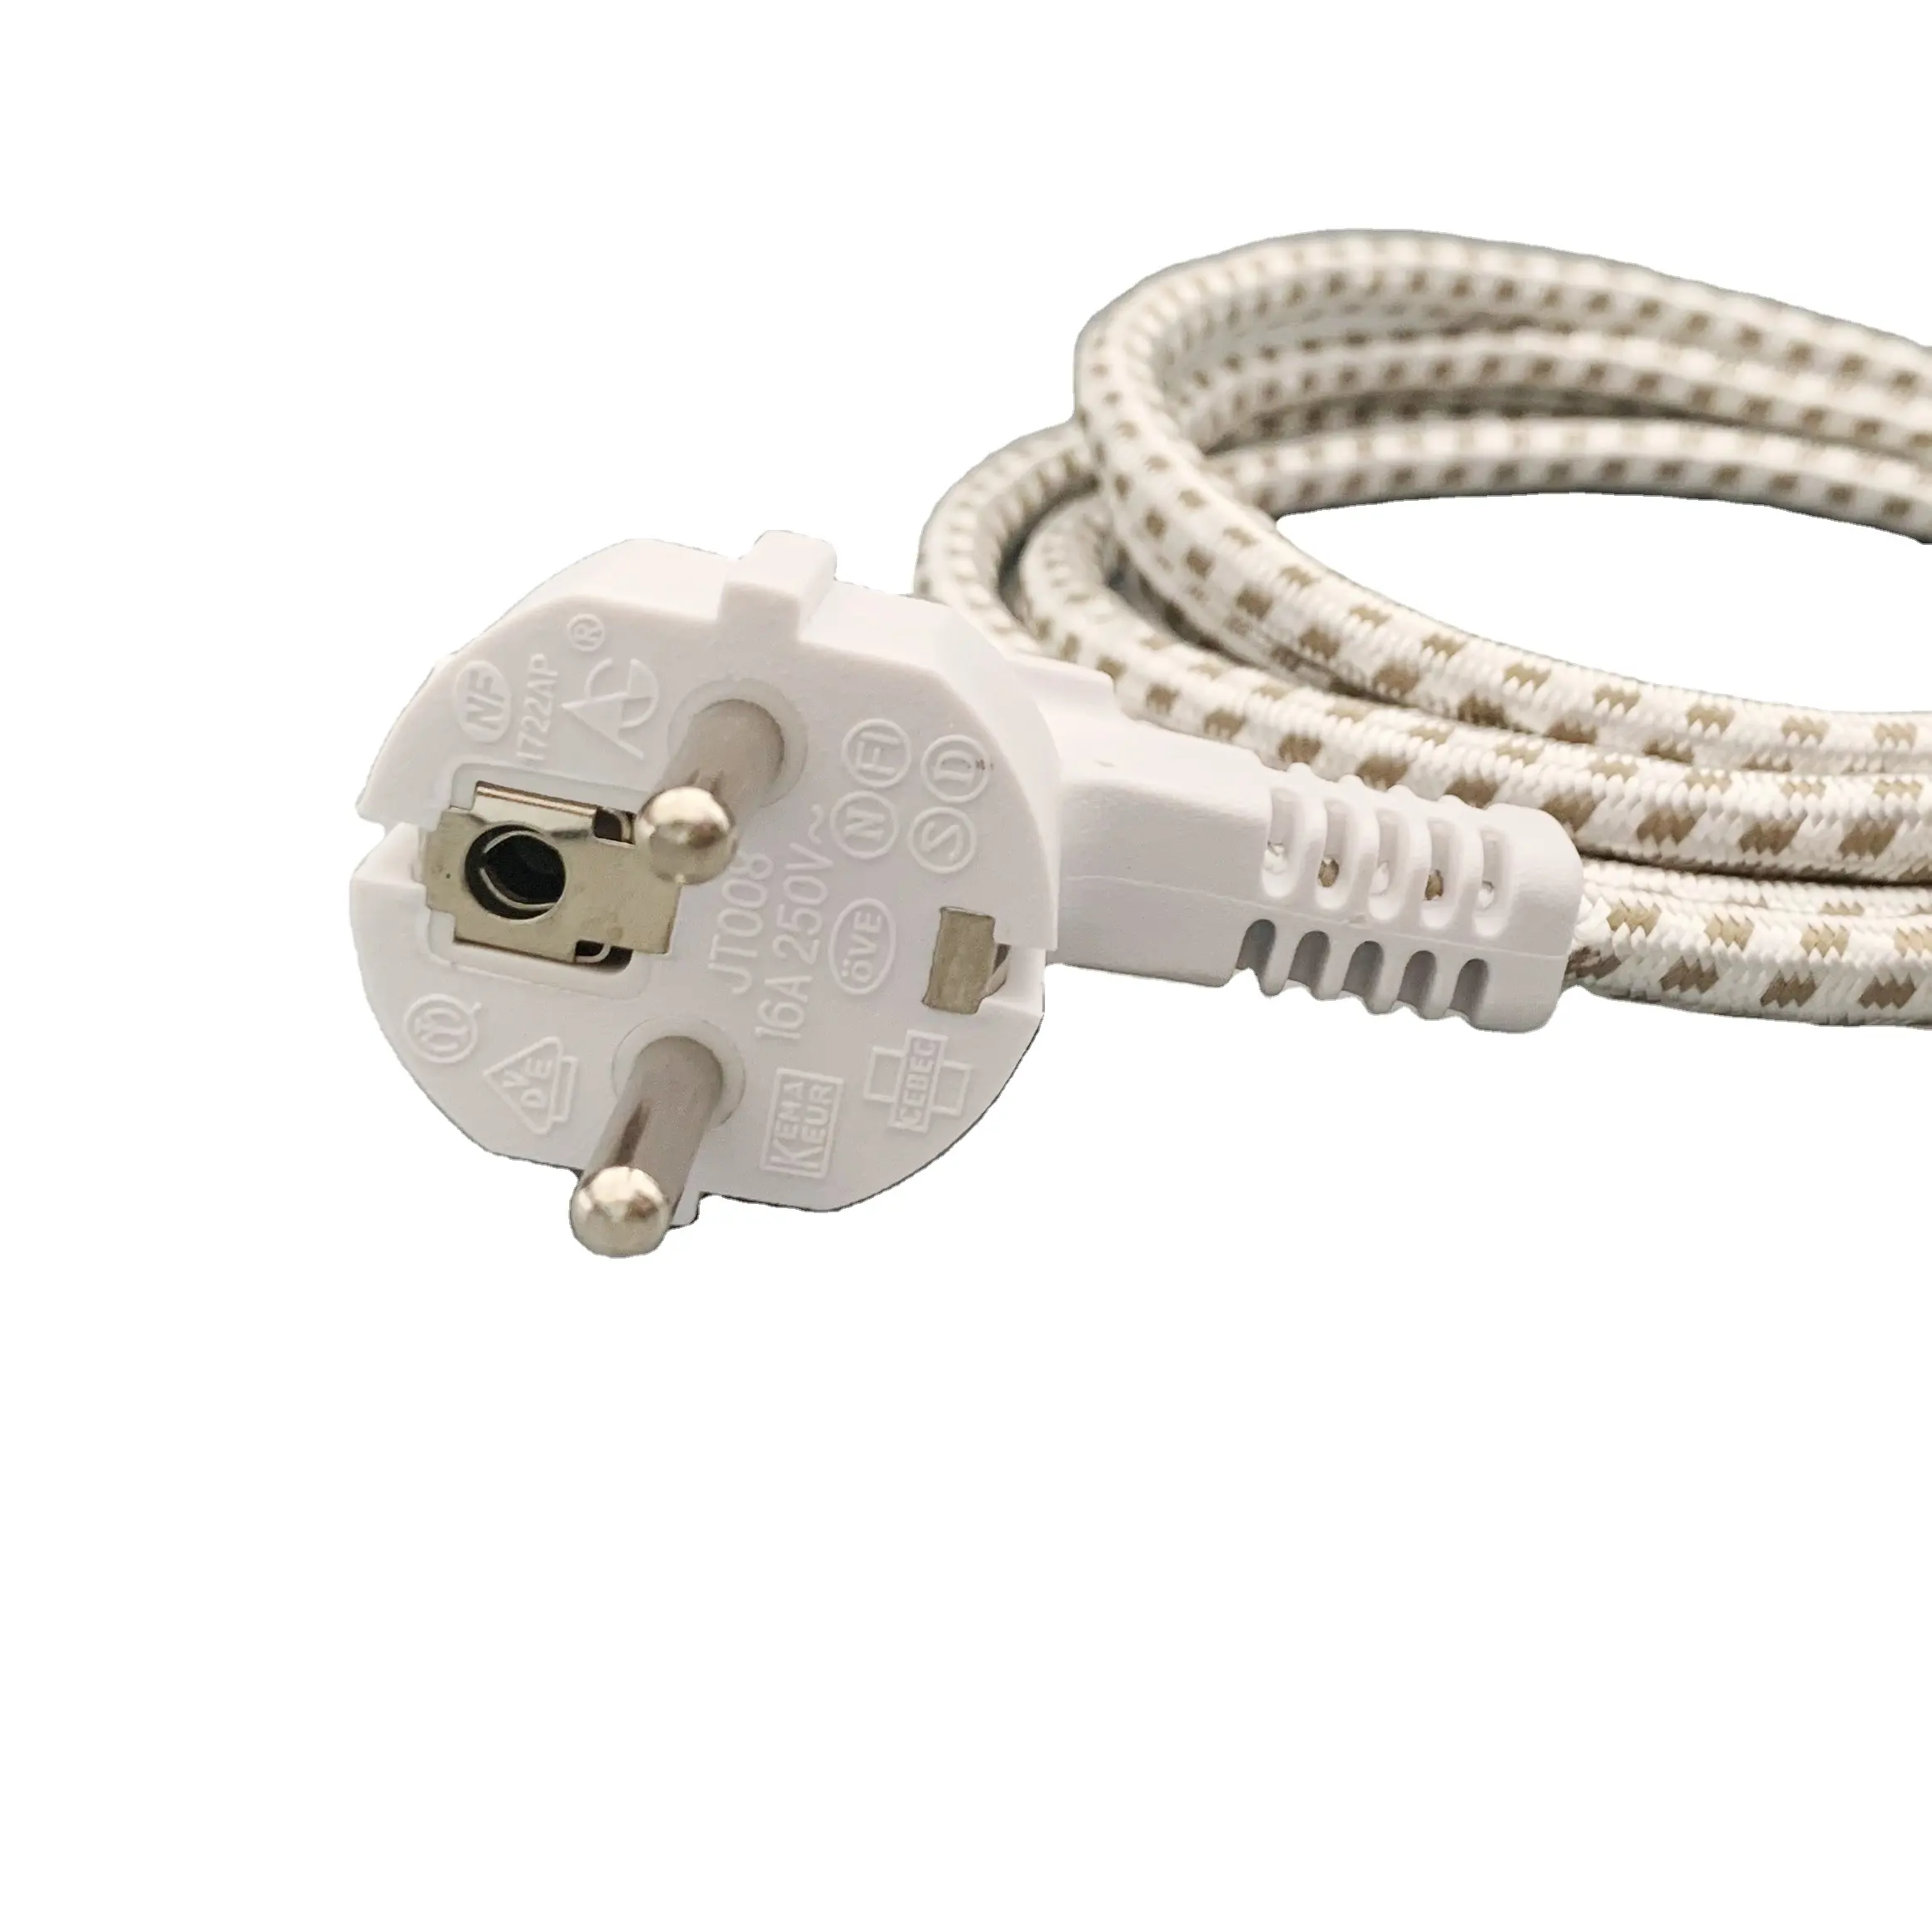 Customised European textile braided H03RT-H ac power cord cable for steam iron